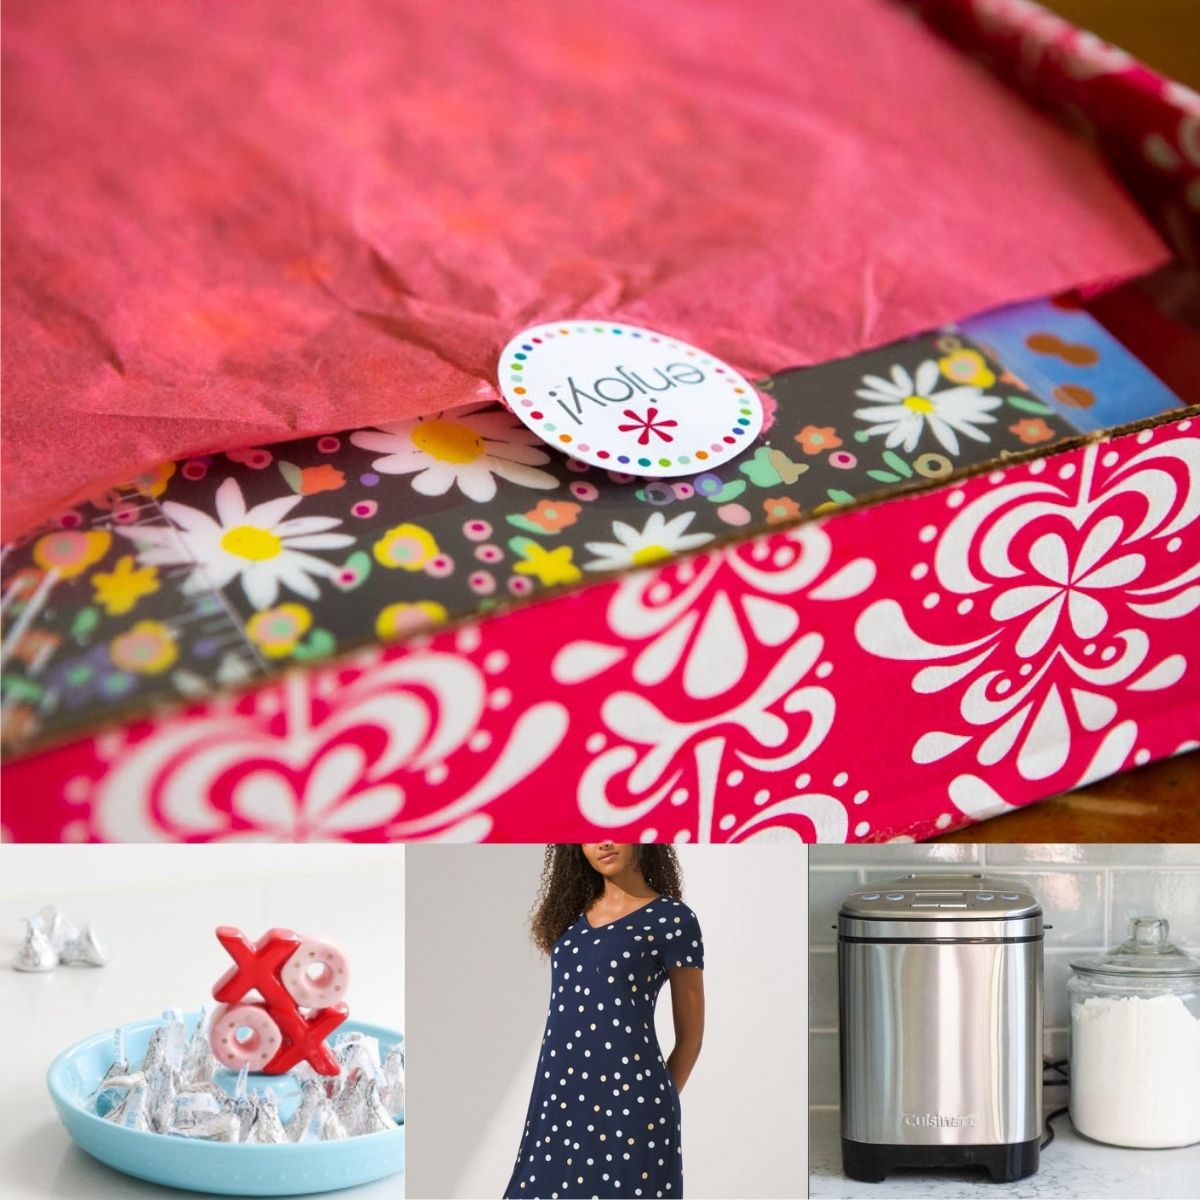 A photo collage shows some of the gift ideas for mom including a candy dish, a nightgown, and a bread machine.